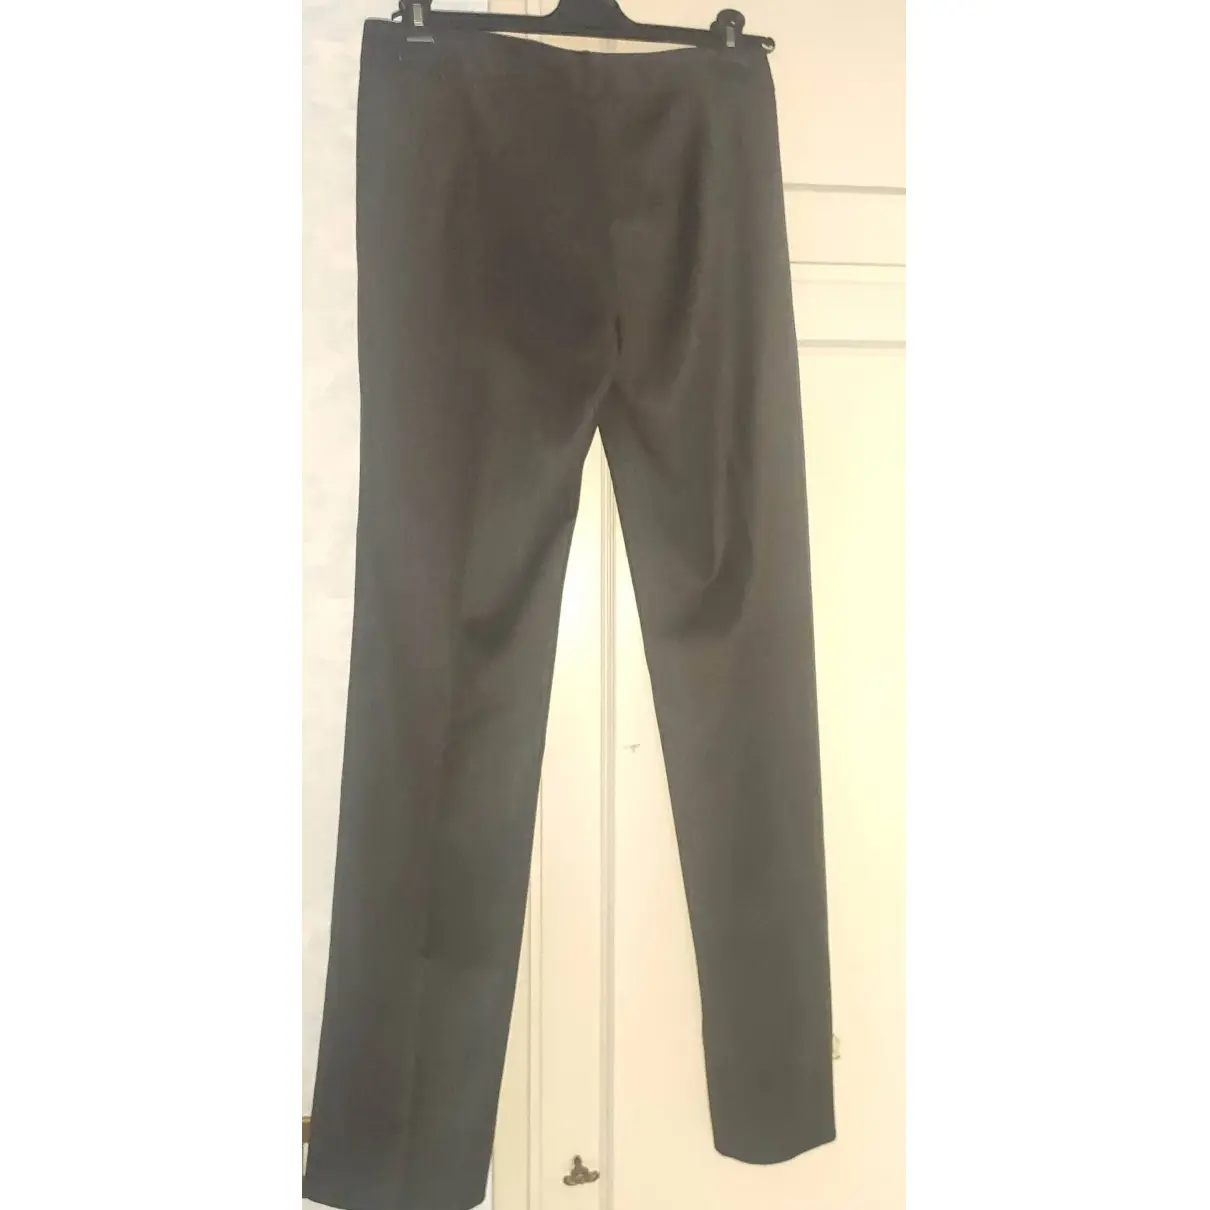 Buy Max & Co Trousers online